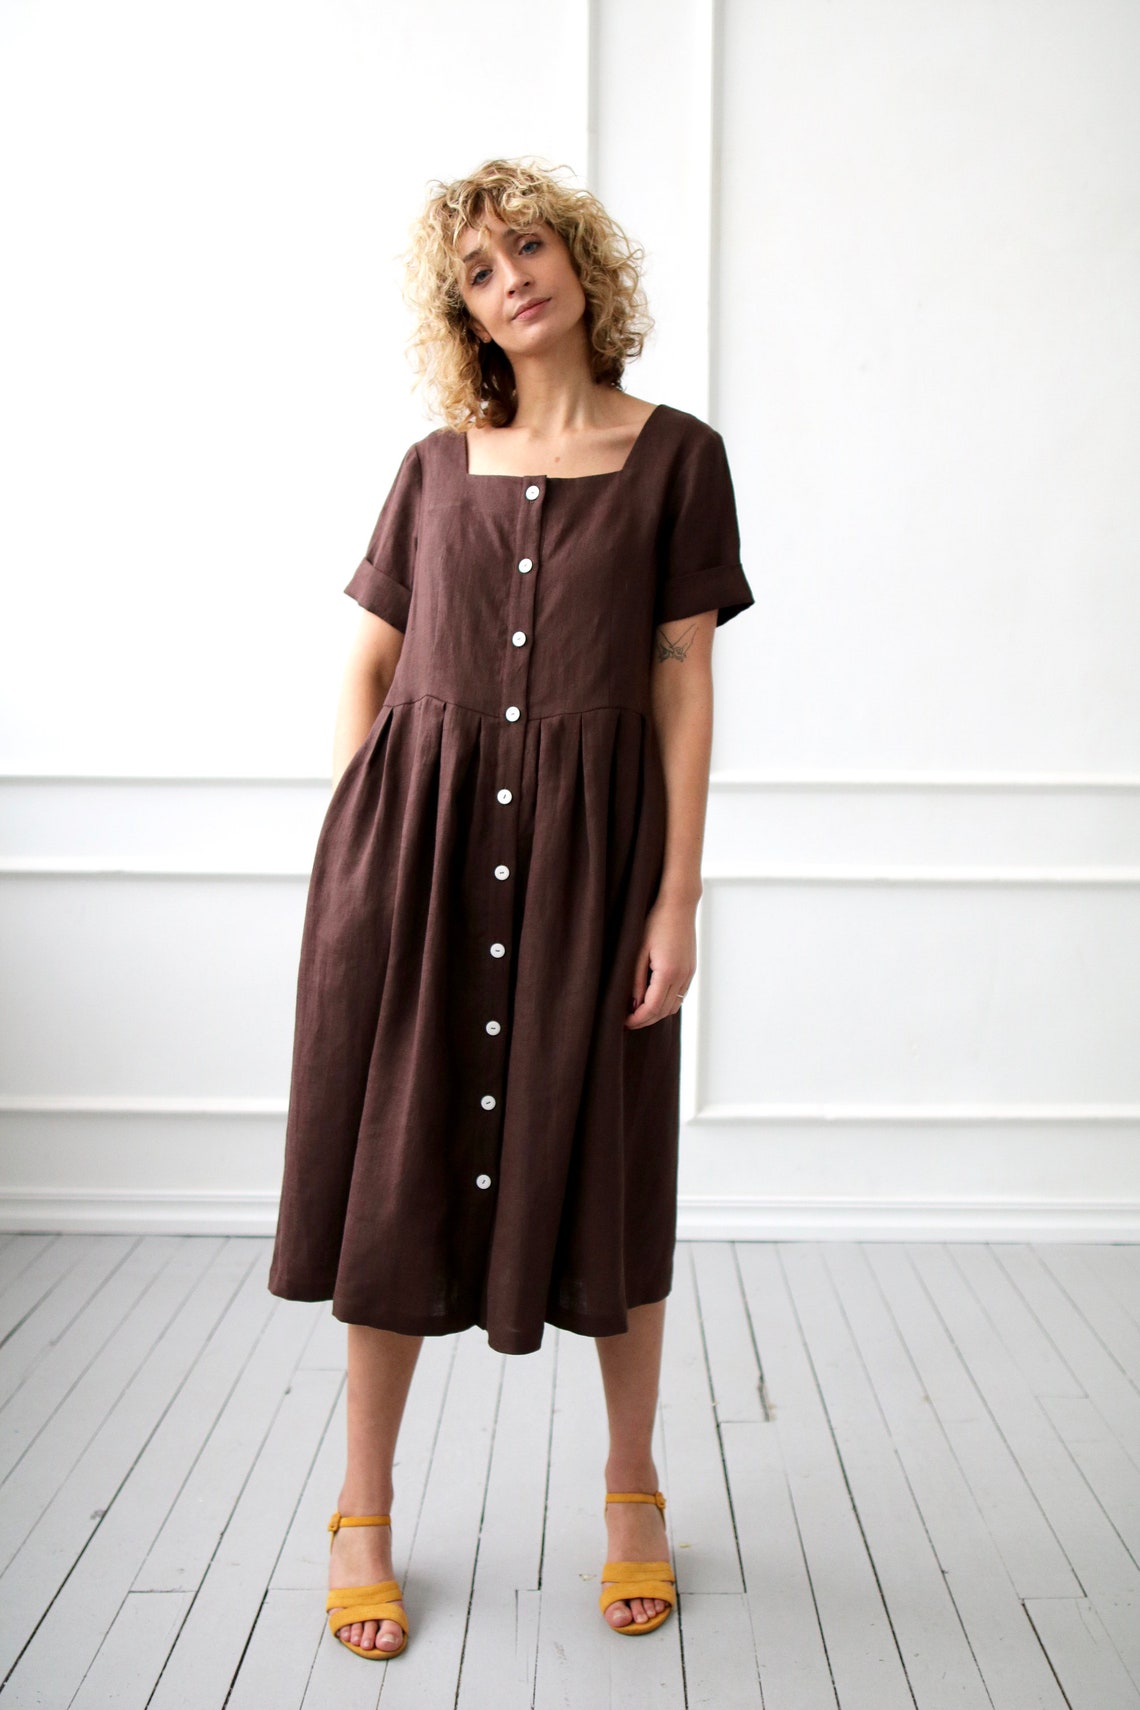 Linen dress in chocolate brown color / OFFON Clothing | Etsy